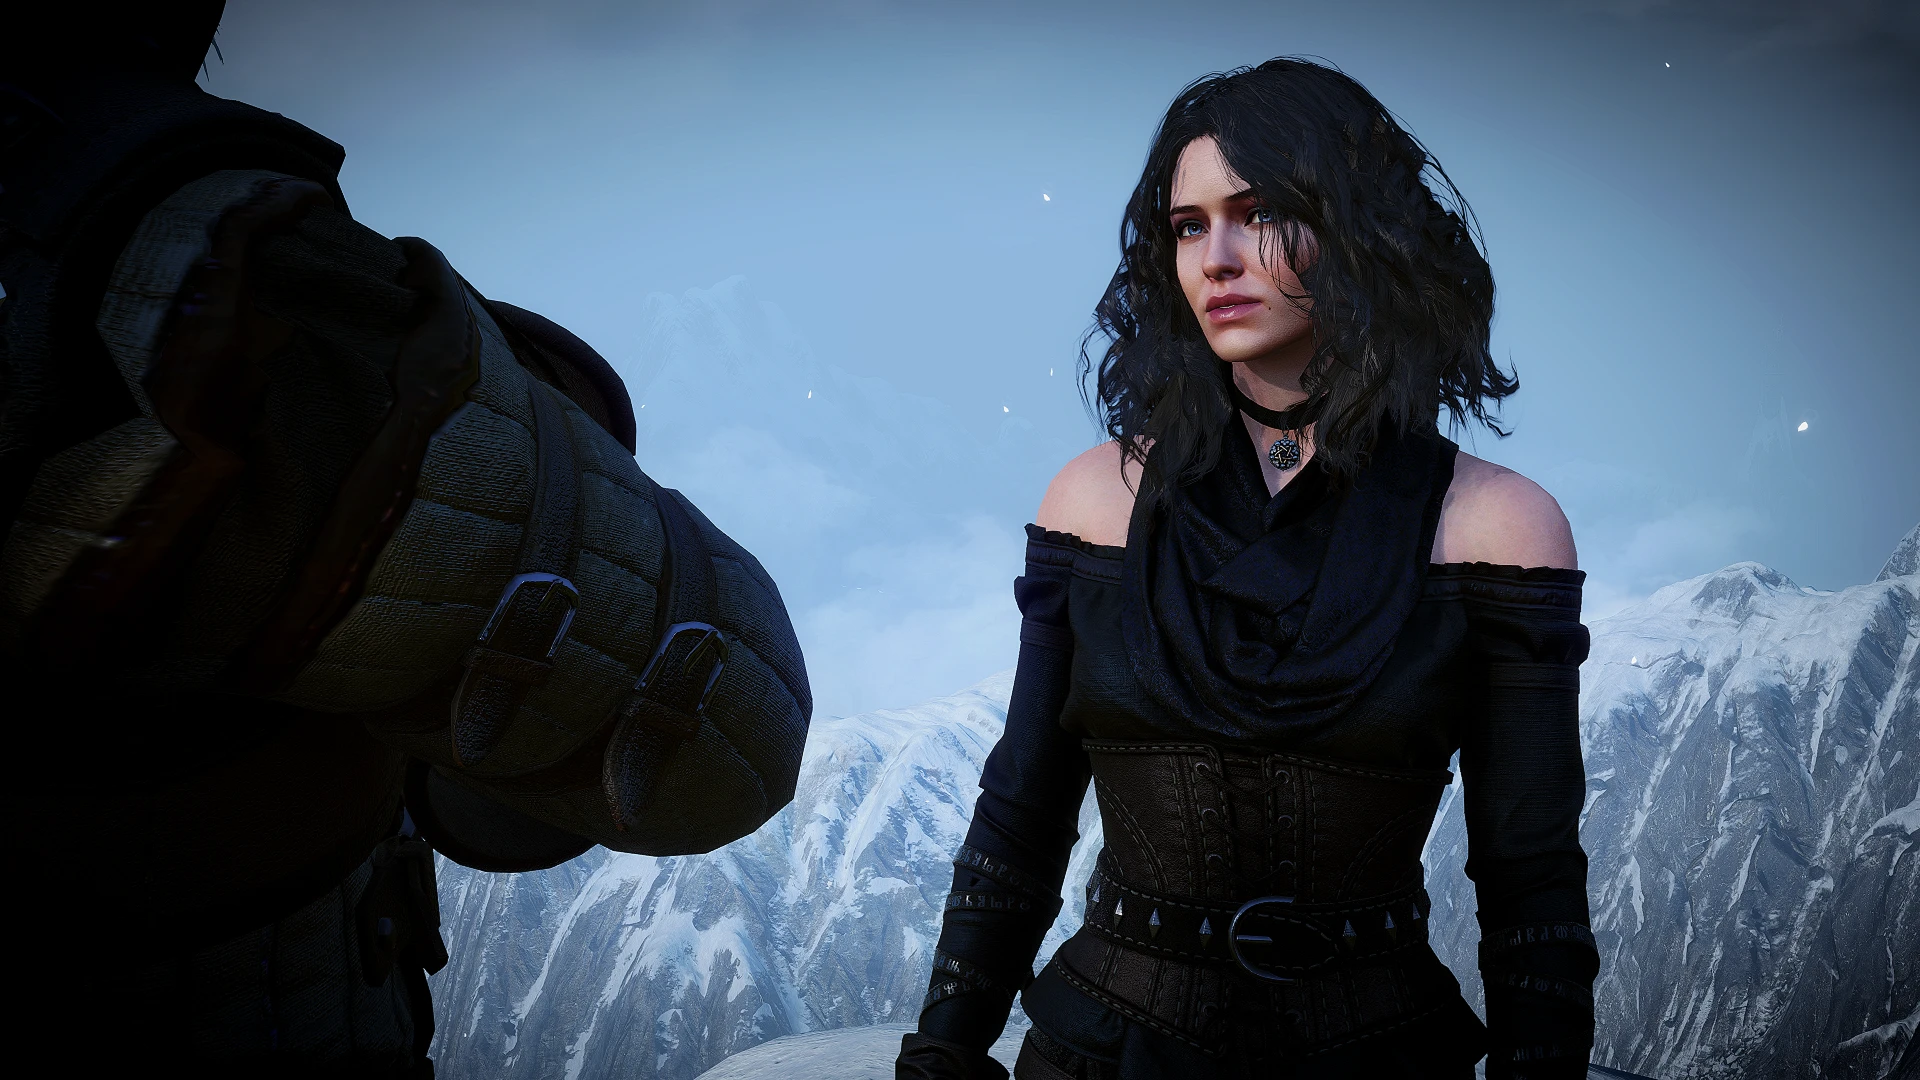 Yennefer of vengerberg the witcher 3 voiced standalone follower фото 90